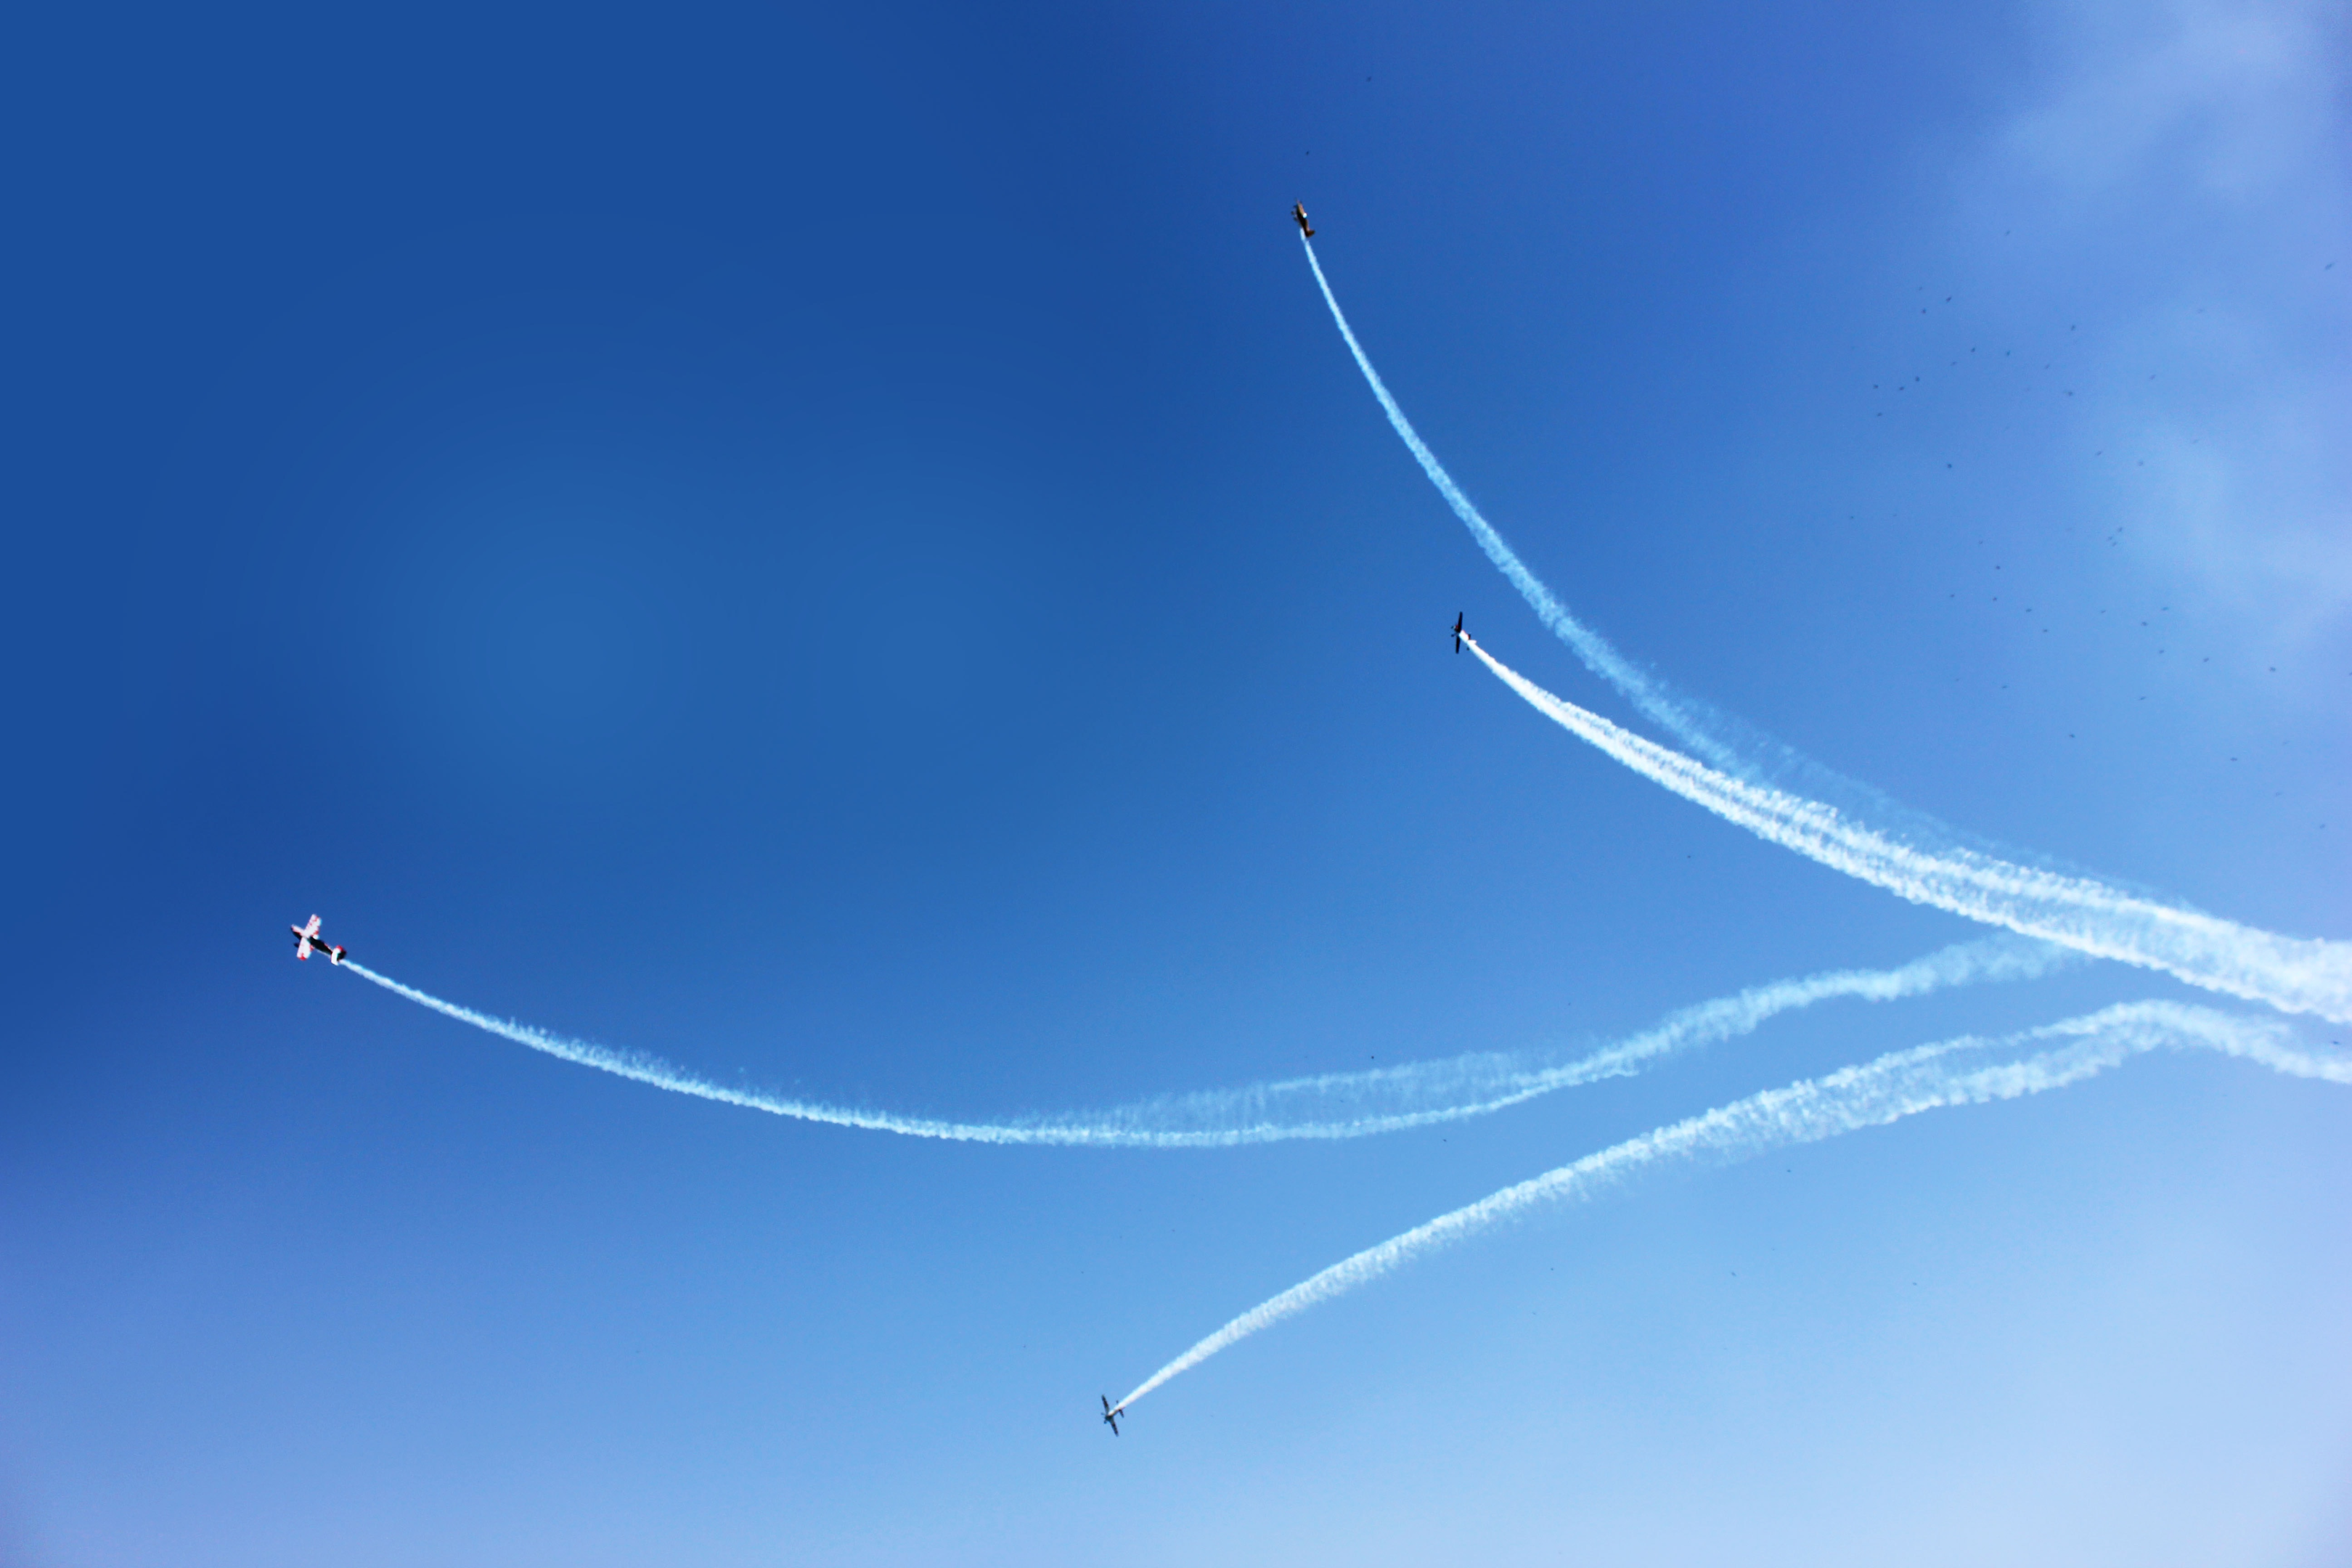 An aerobatic air show with four planes performing an act